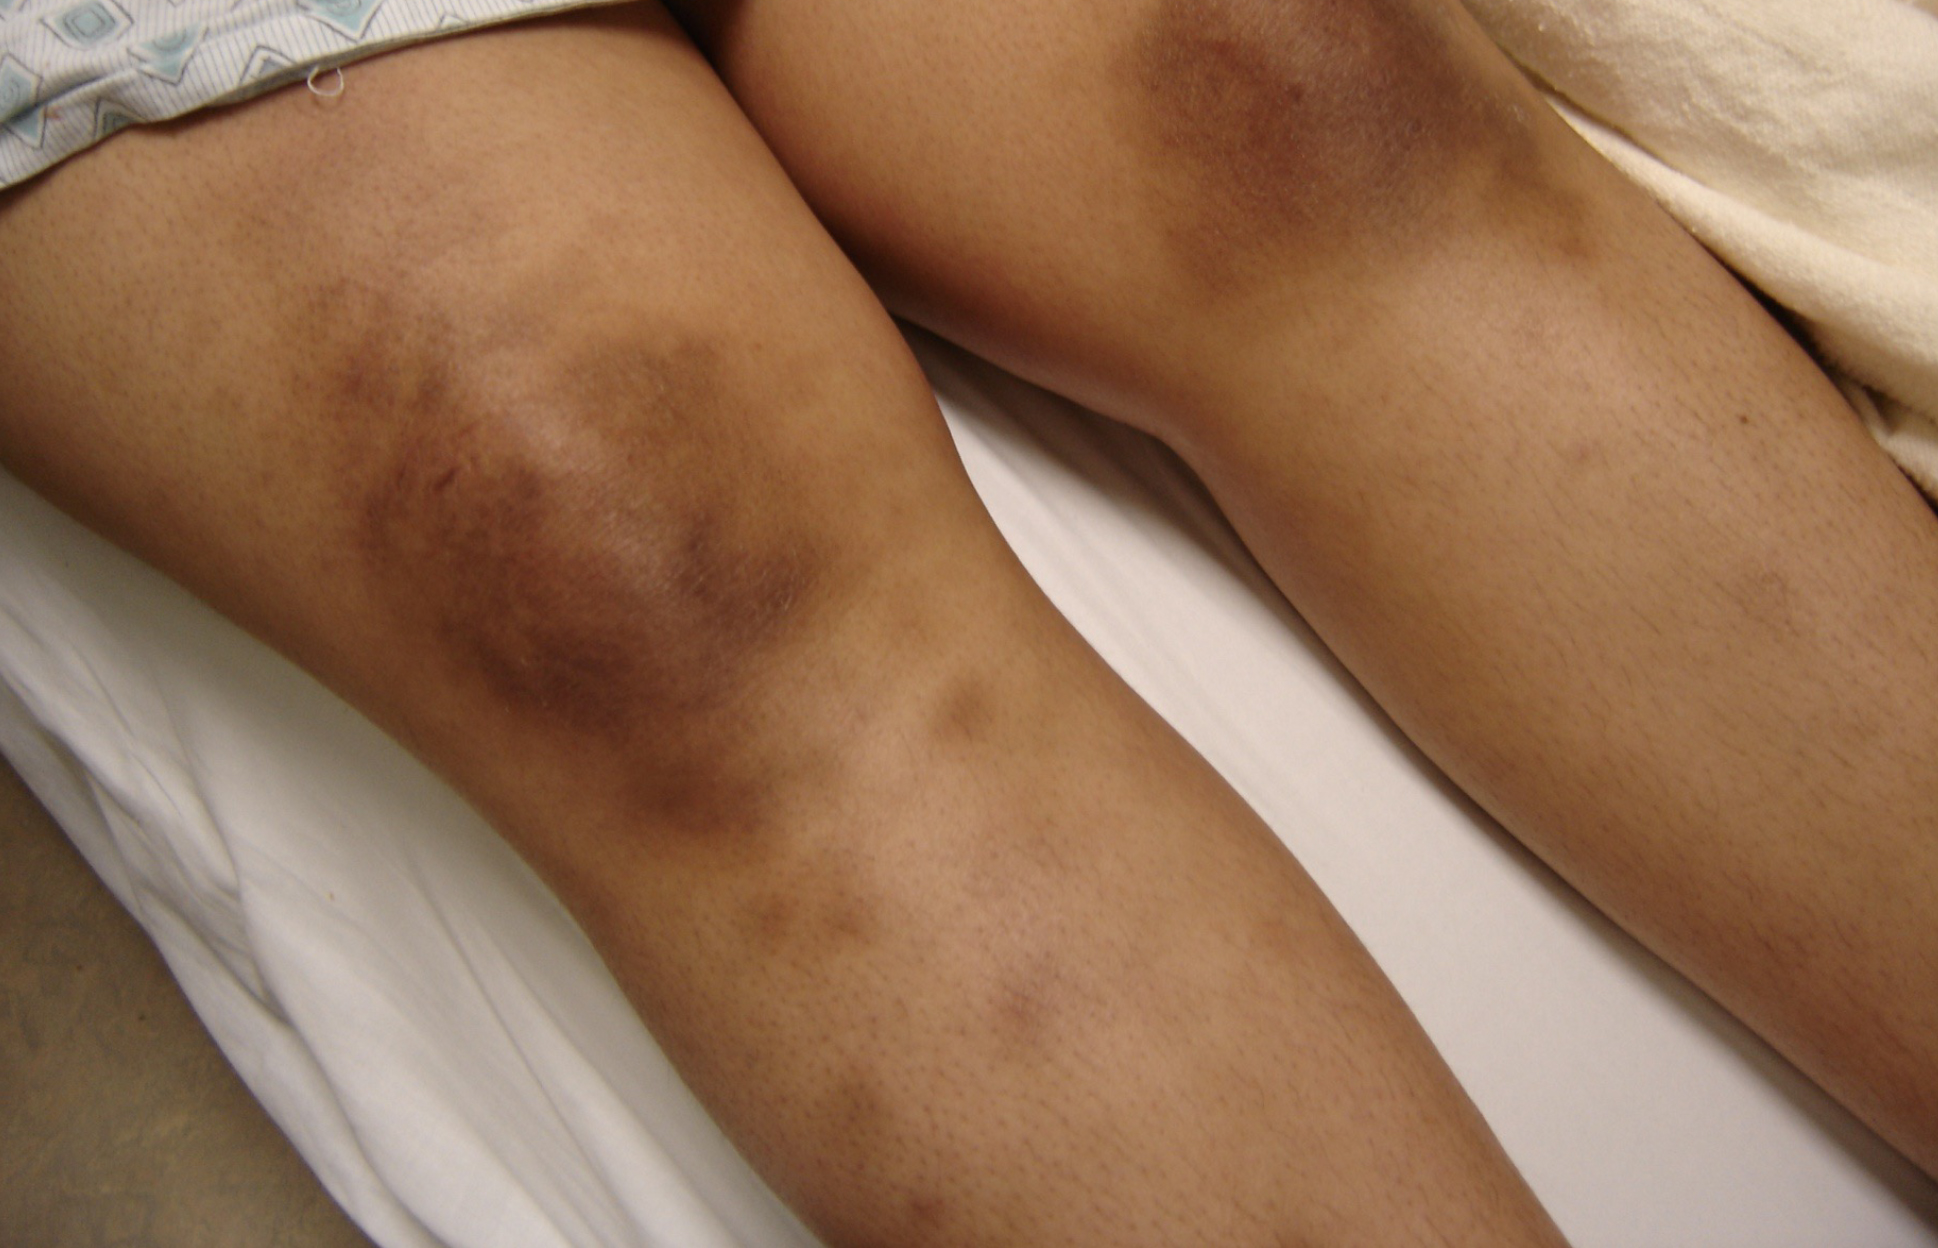 Itchy lupus rash on legs: Pictures, symptoms, and more